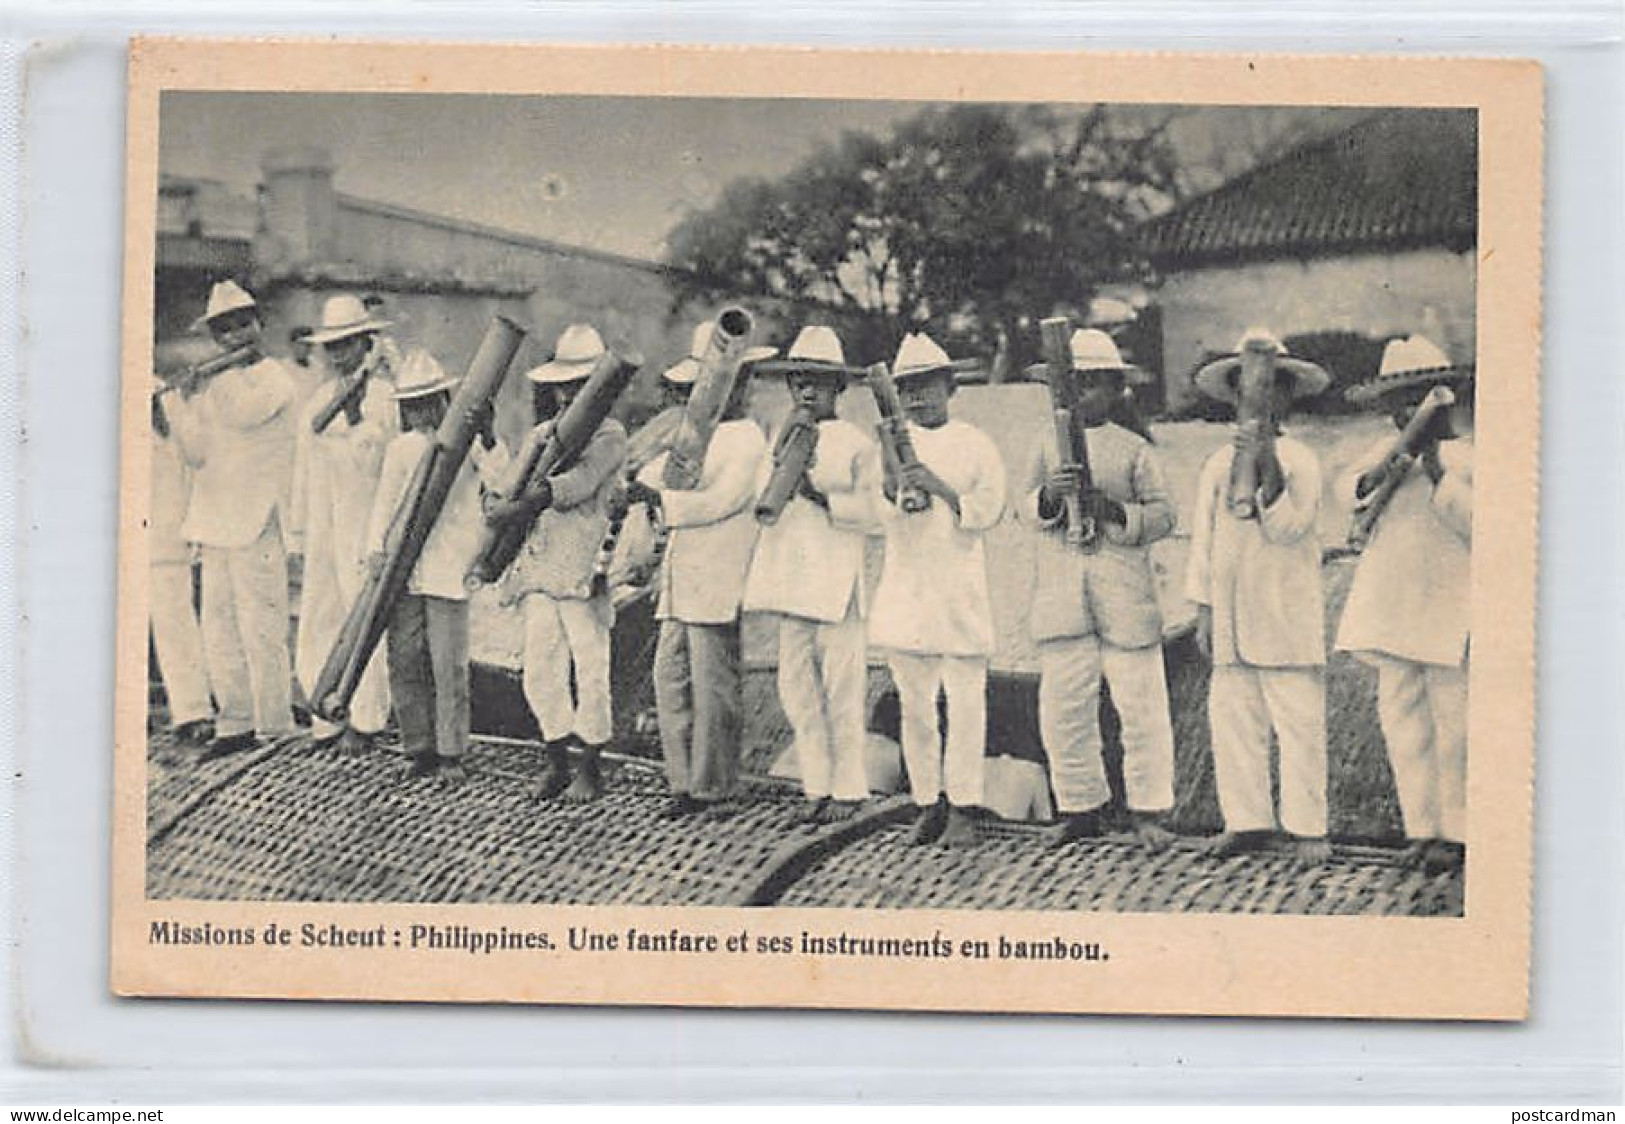 Philippines - A Marching Band And Its Bamboo Instruments - Publ. Missiën Van Scheut - Scheut Missions  - Philippines